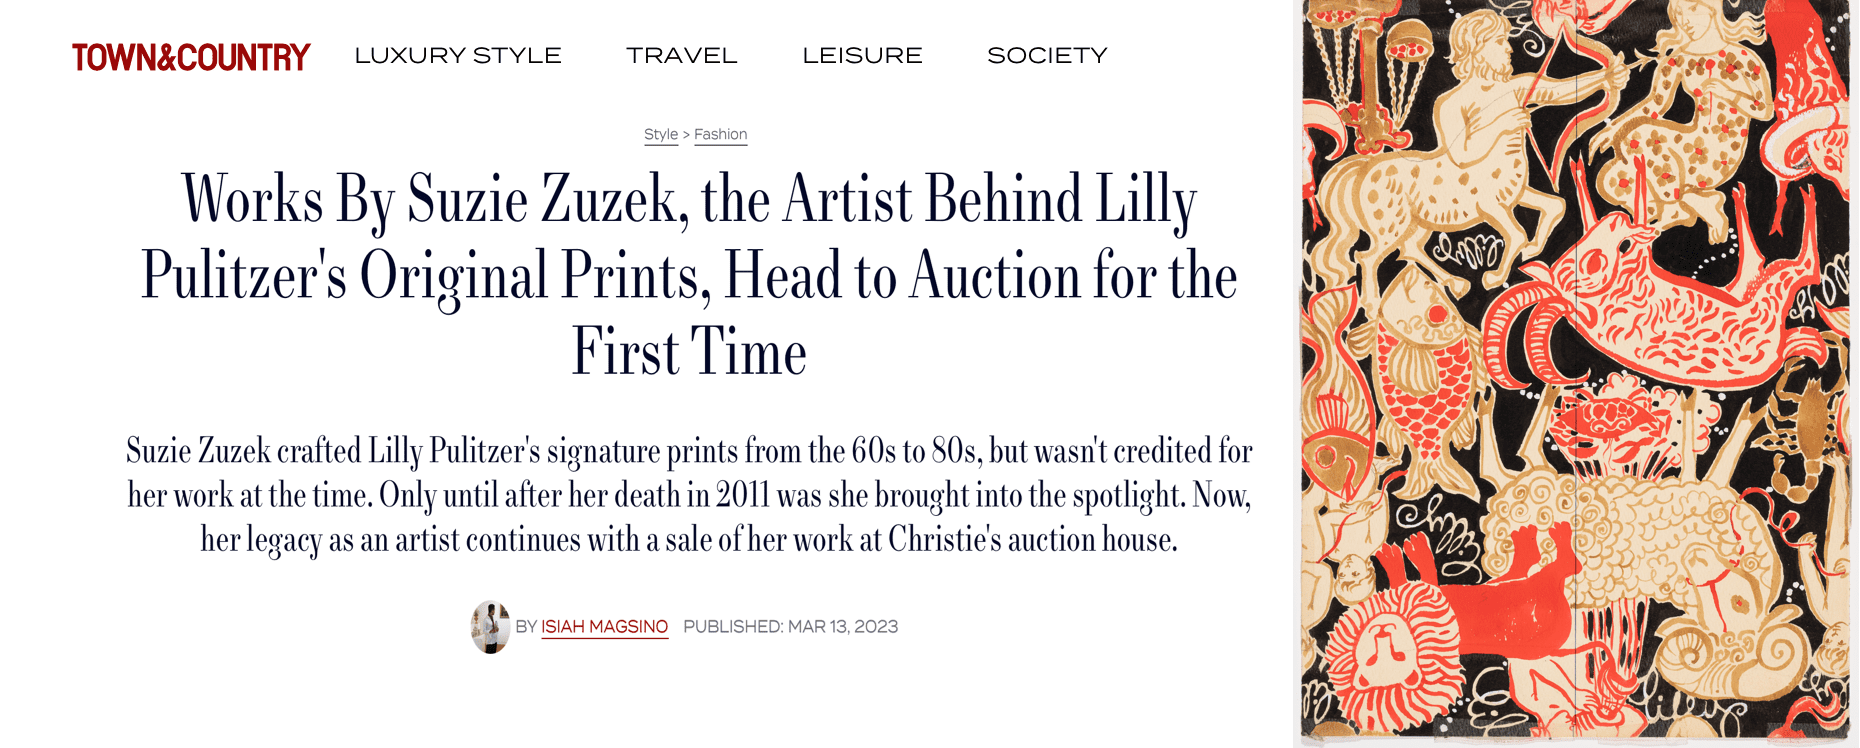 A newspaper article about lilly pulitzer.